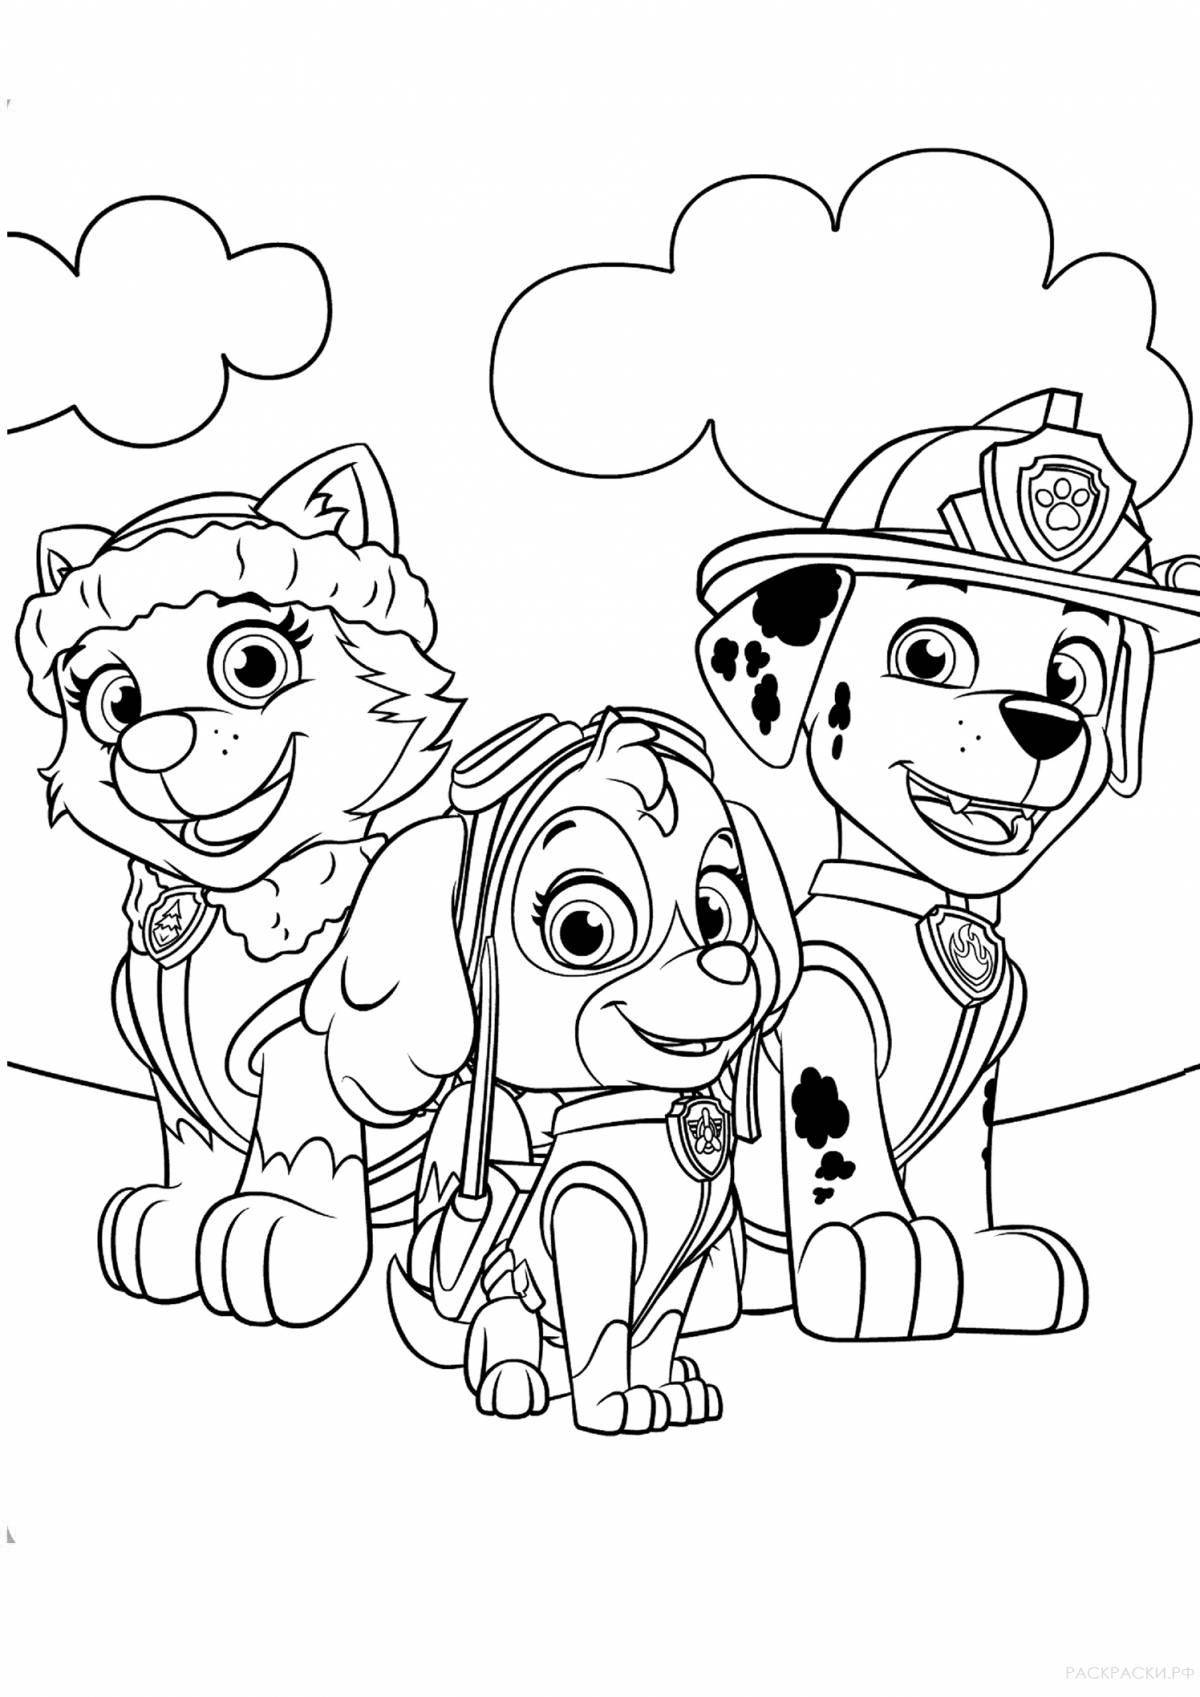 Exciting sky coloring book for 3-4 year olds